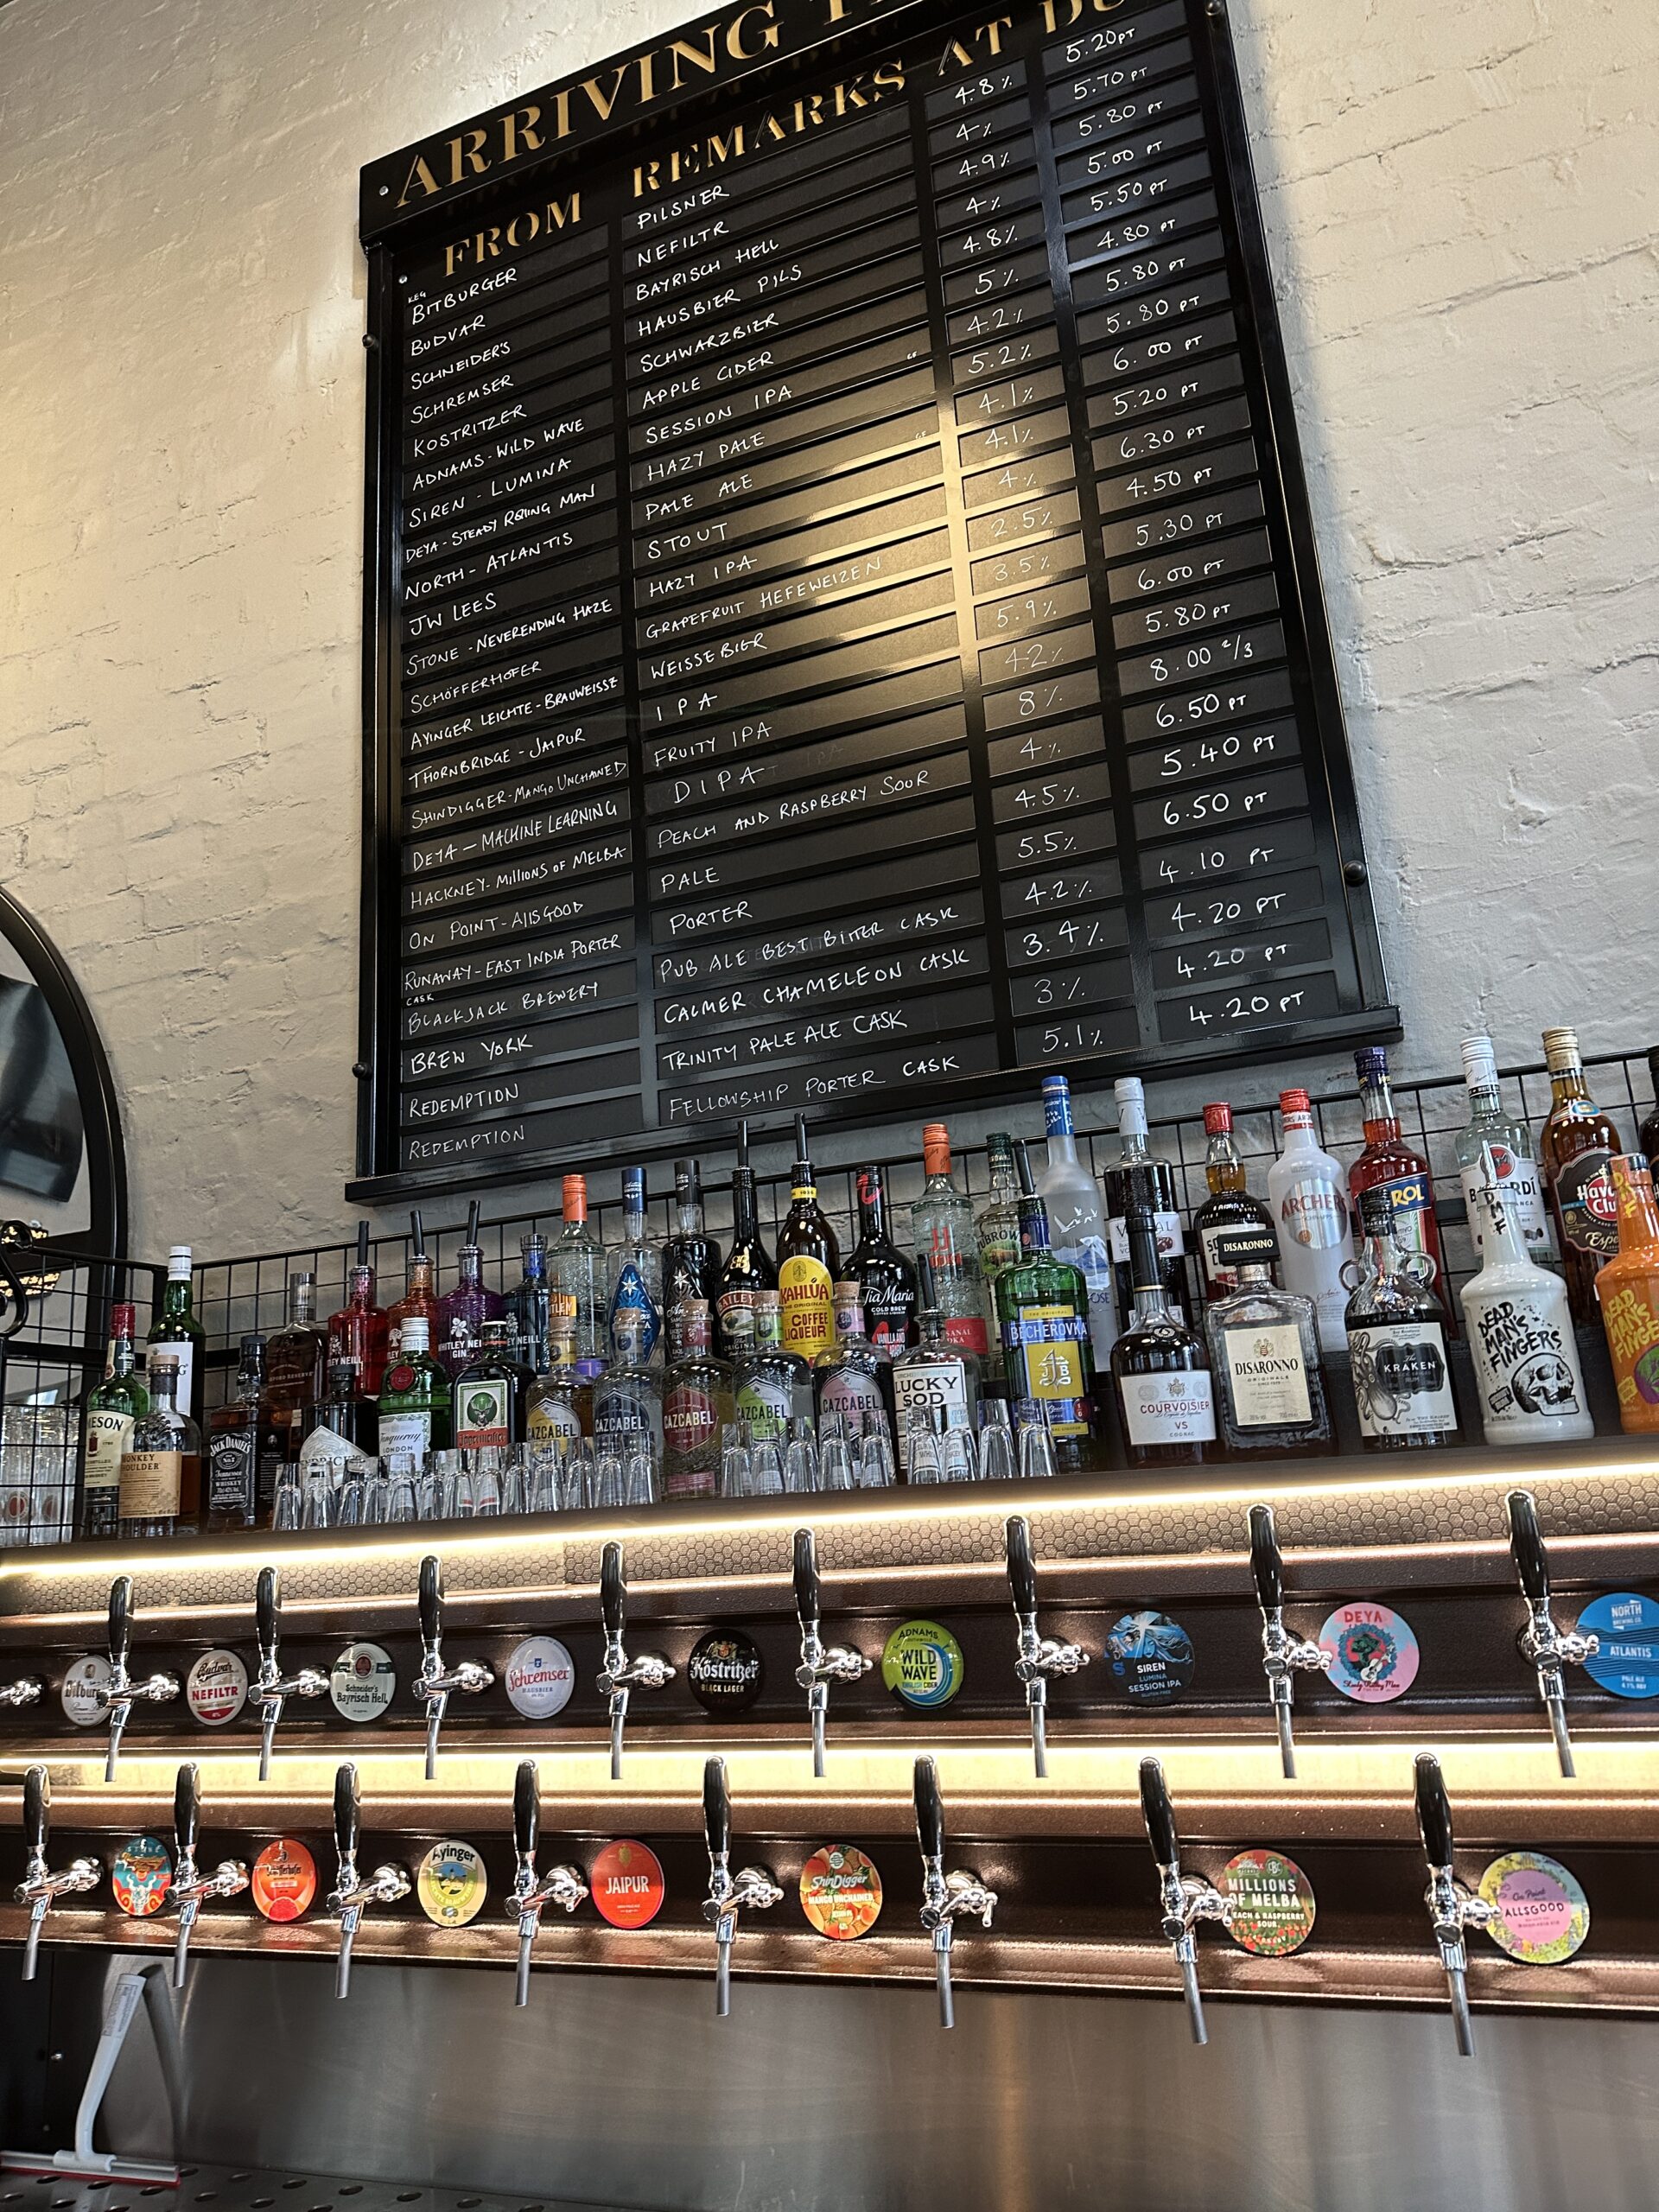 The beer selection at Victoria Tap